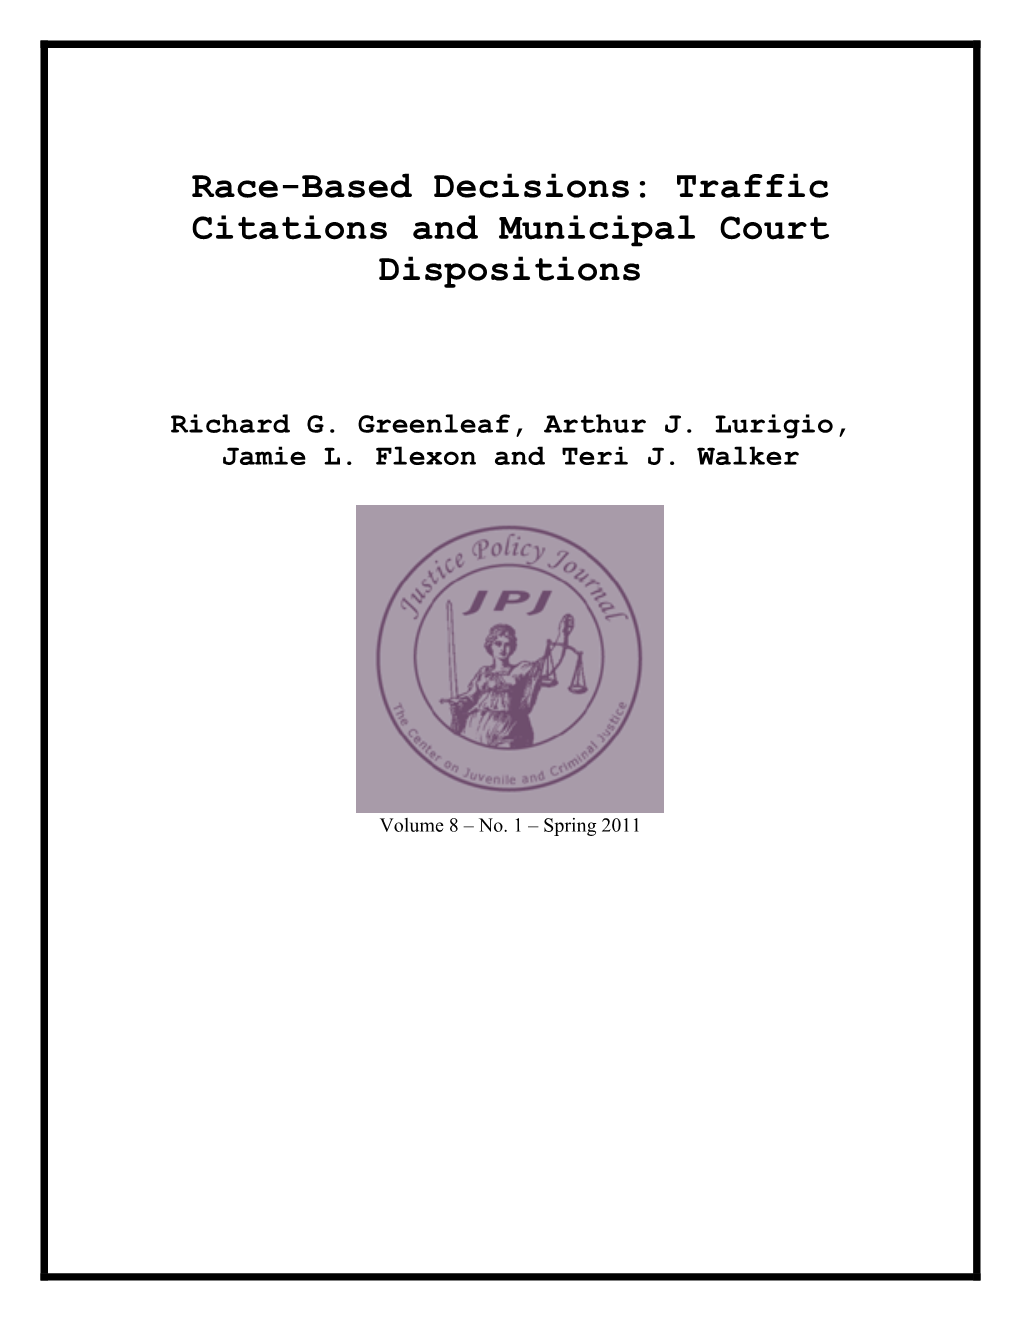 Race-Based Decisions: Traffic Citations and Municipal Court Dispositions